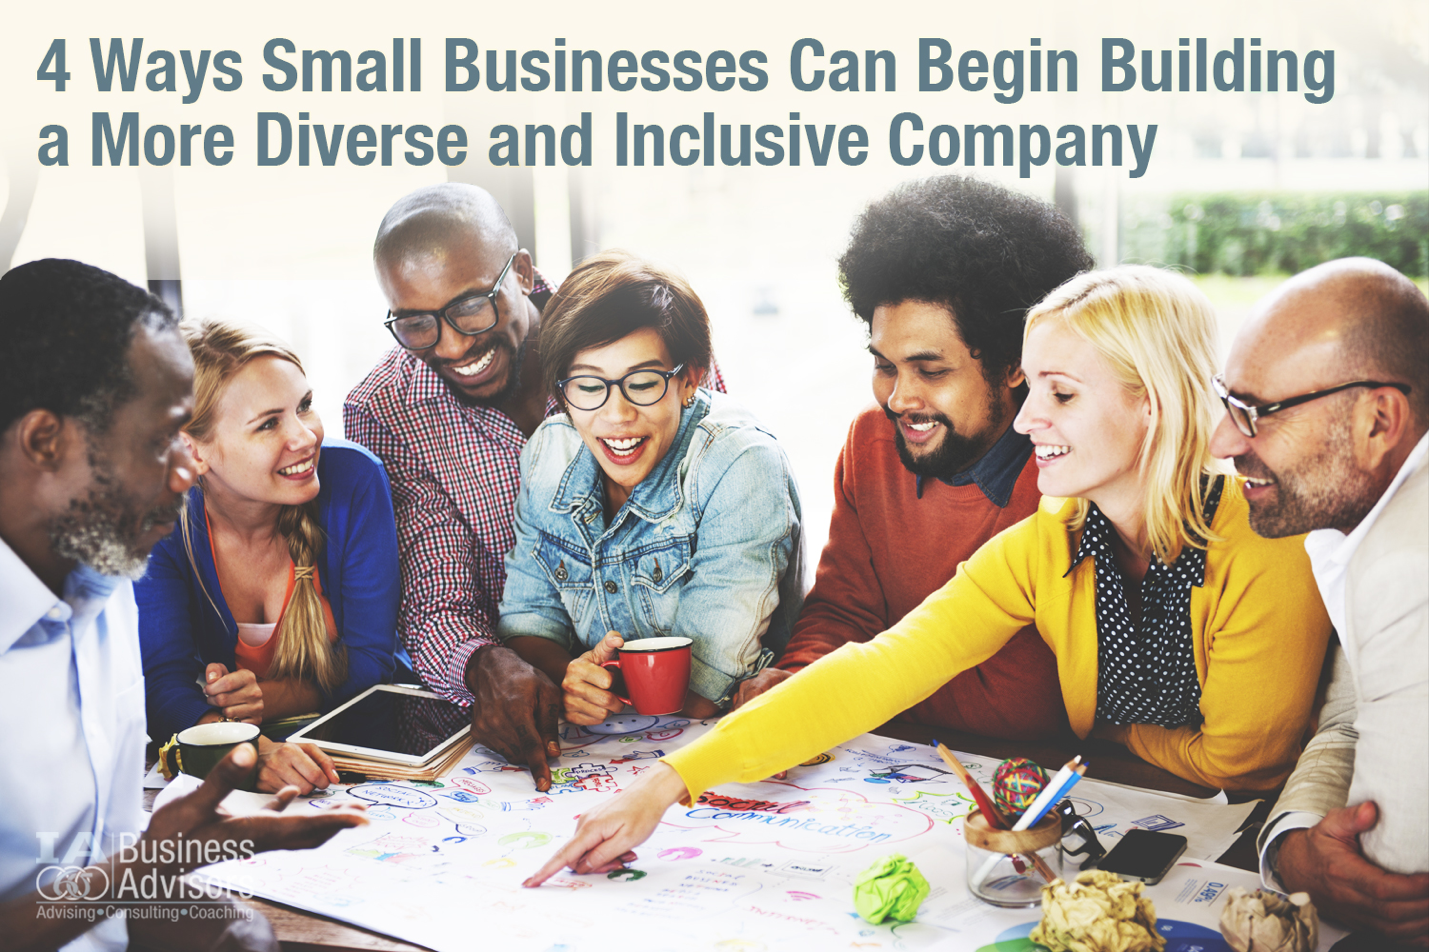 4 Ways Small Businesses Can Begin Building a More Diverse and Inclusive Company